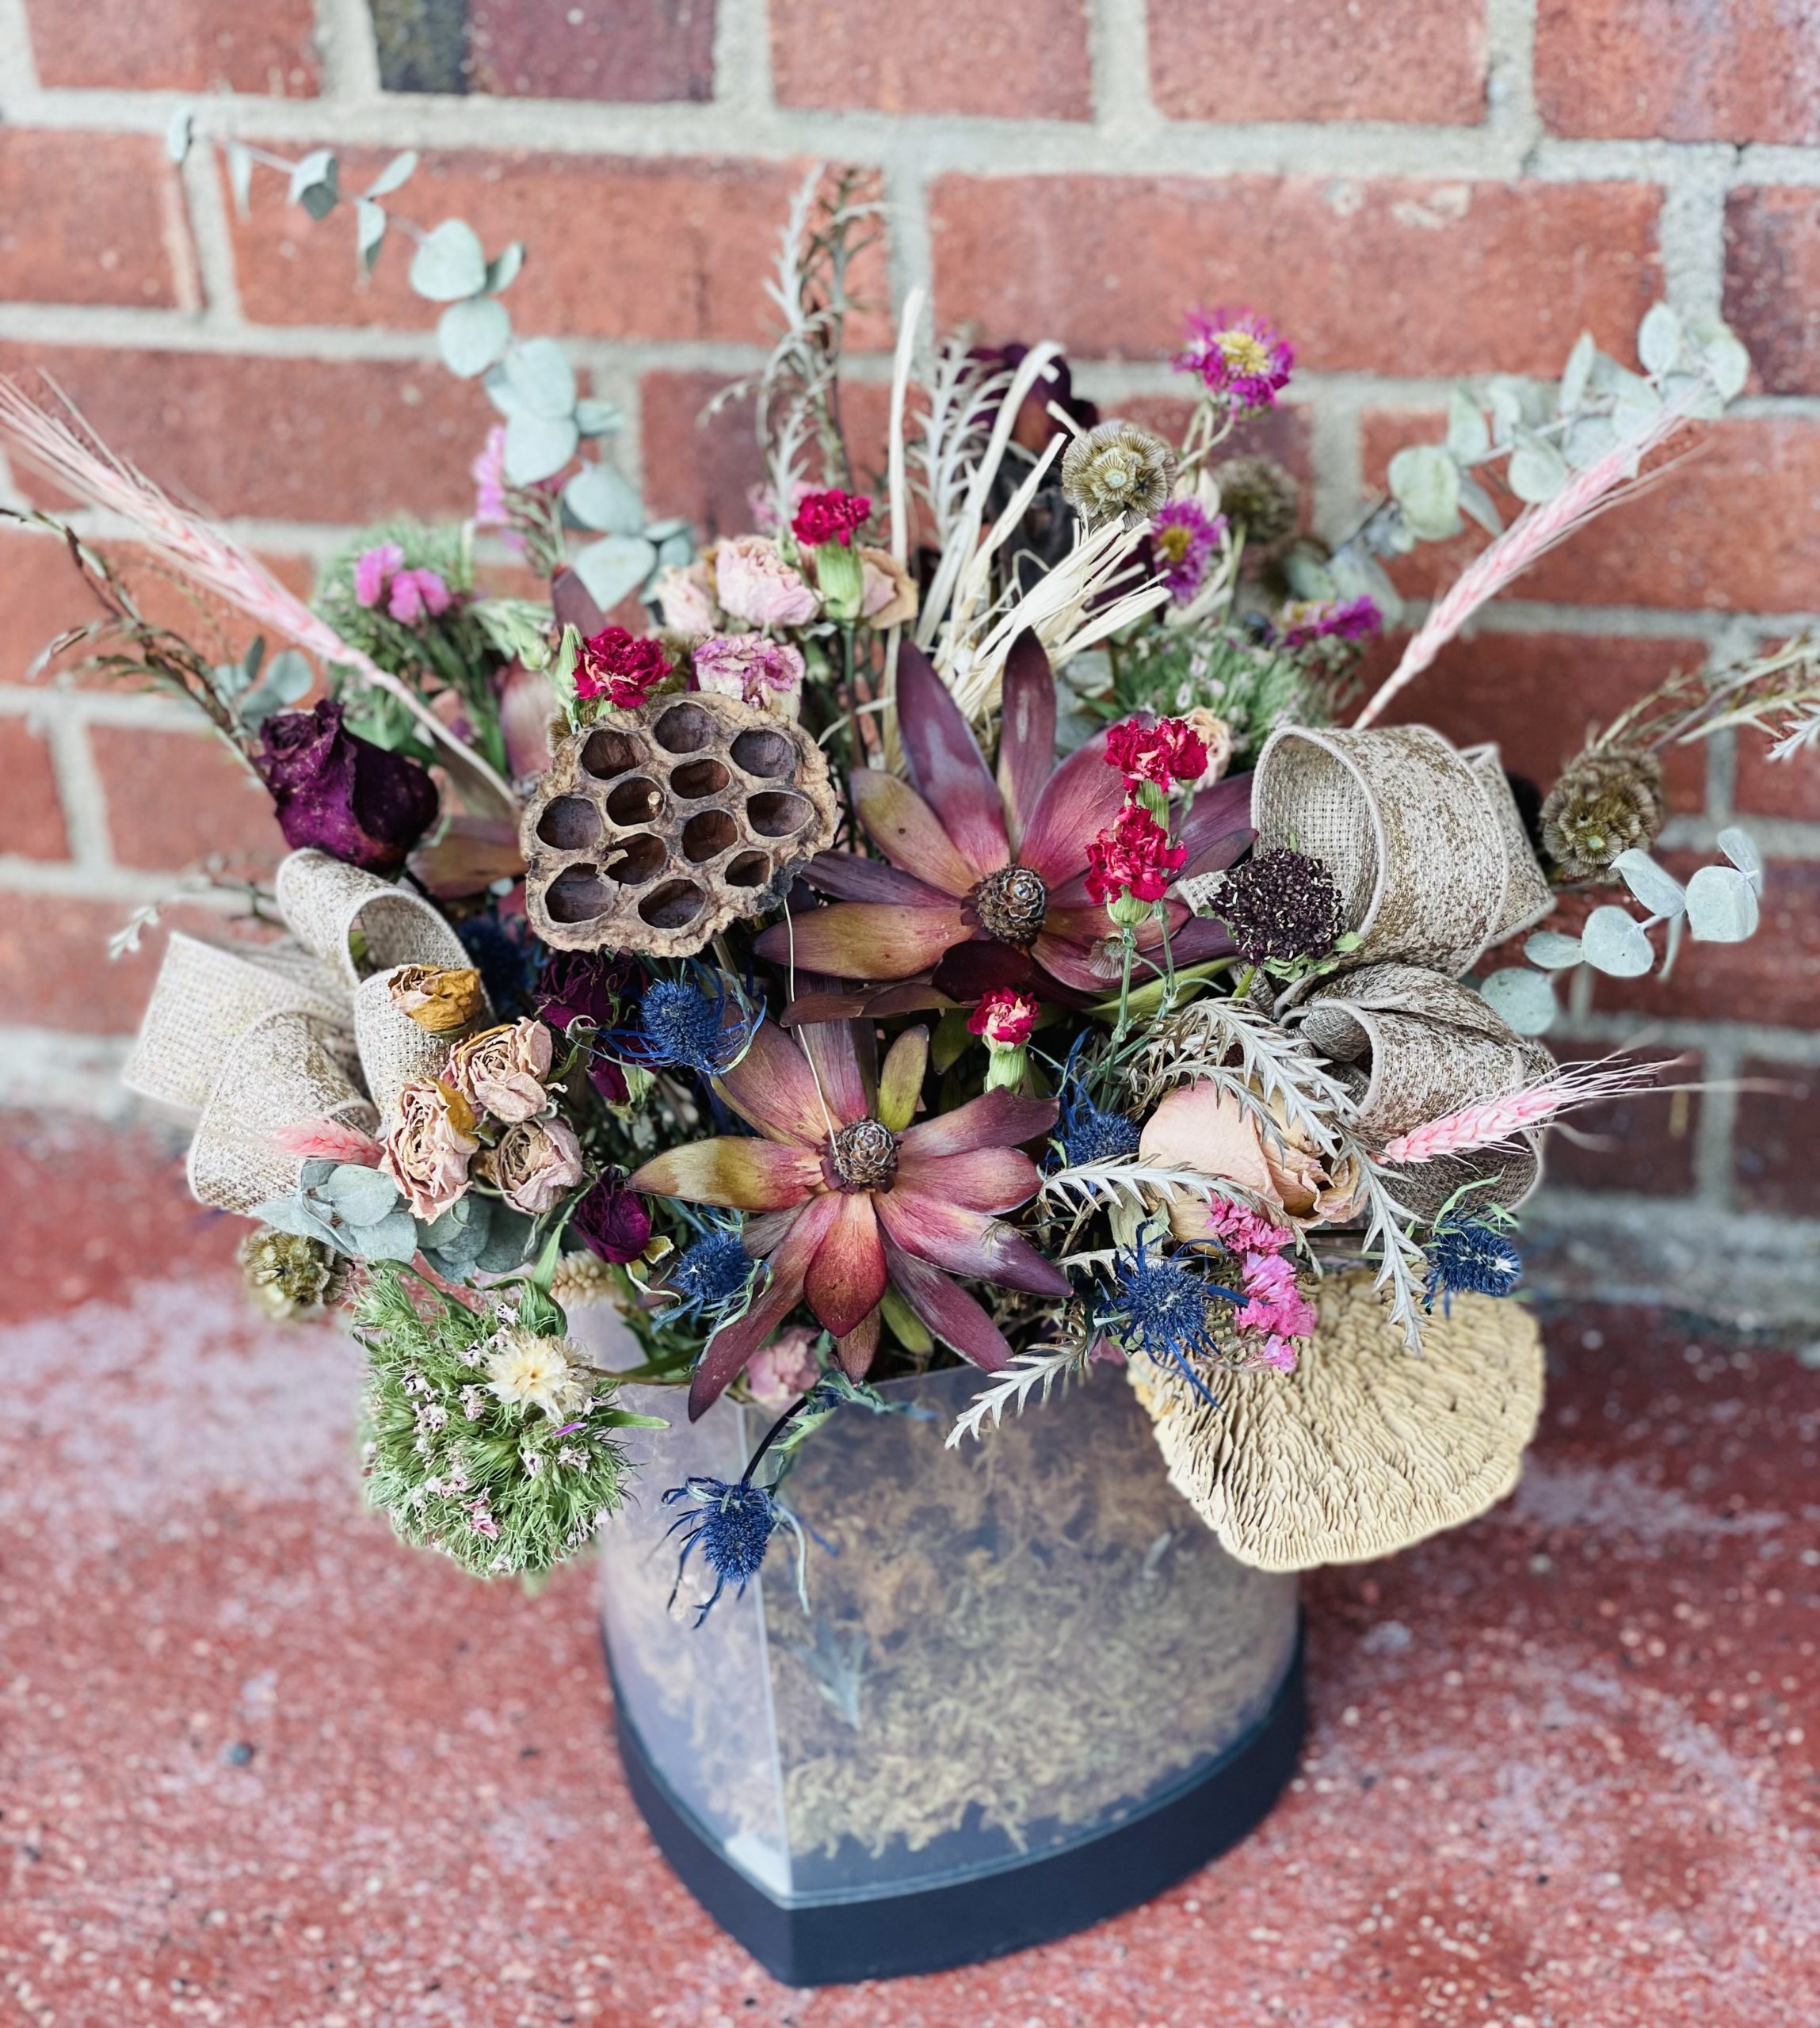 How to Make Dried Floral Arrangements - DIY Dried Flower Bouquet